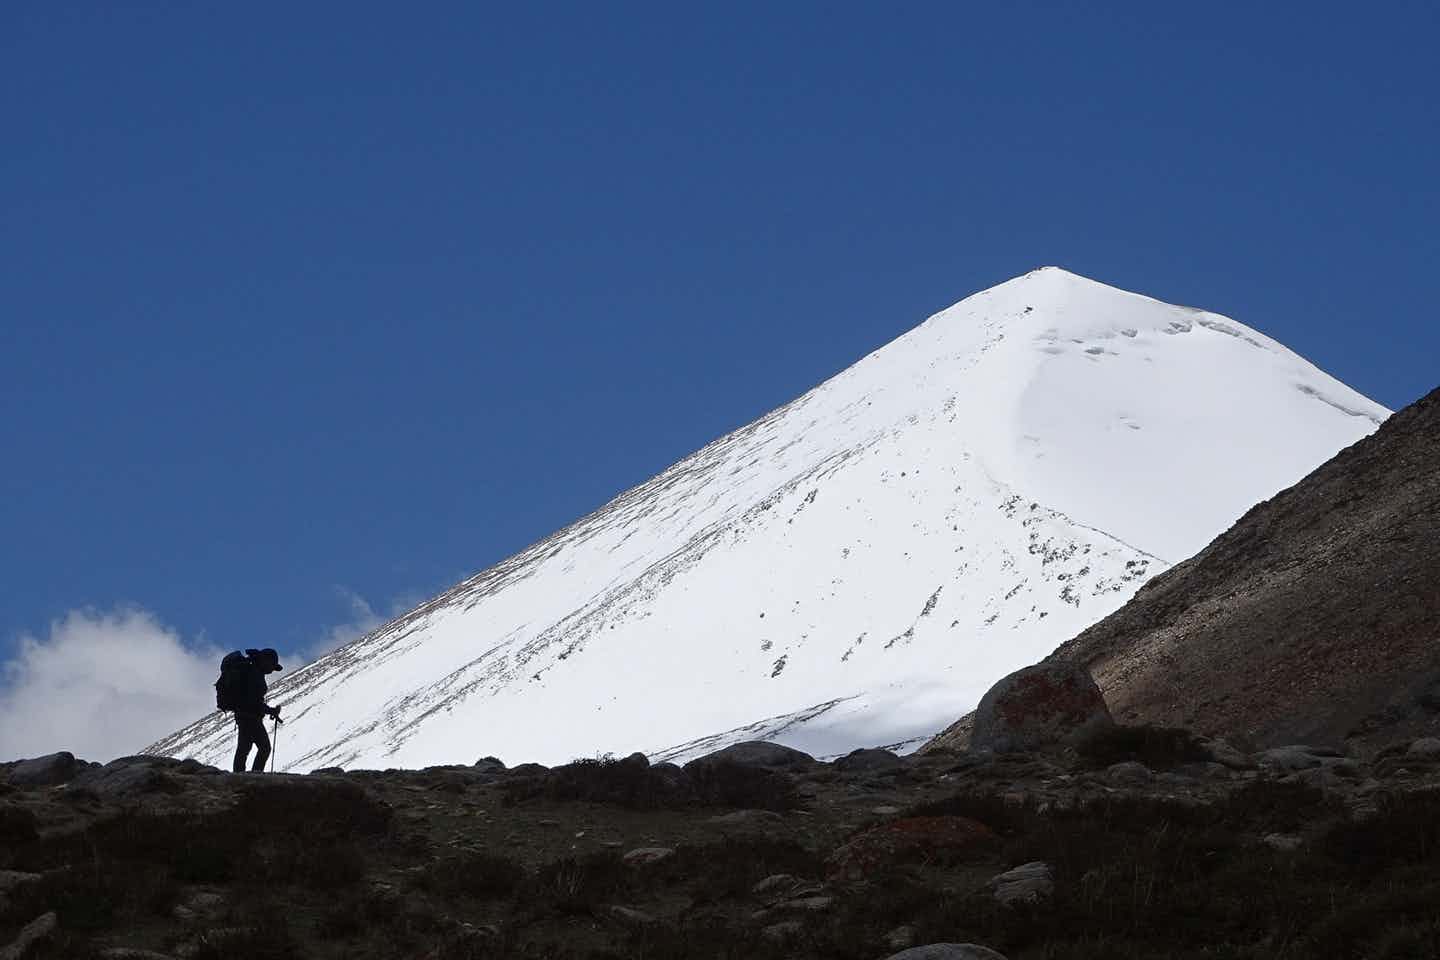 Lone hiker silhouetted against the snowy peak of UT Kangri from base camp in Ladakh, India